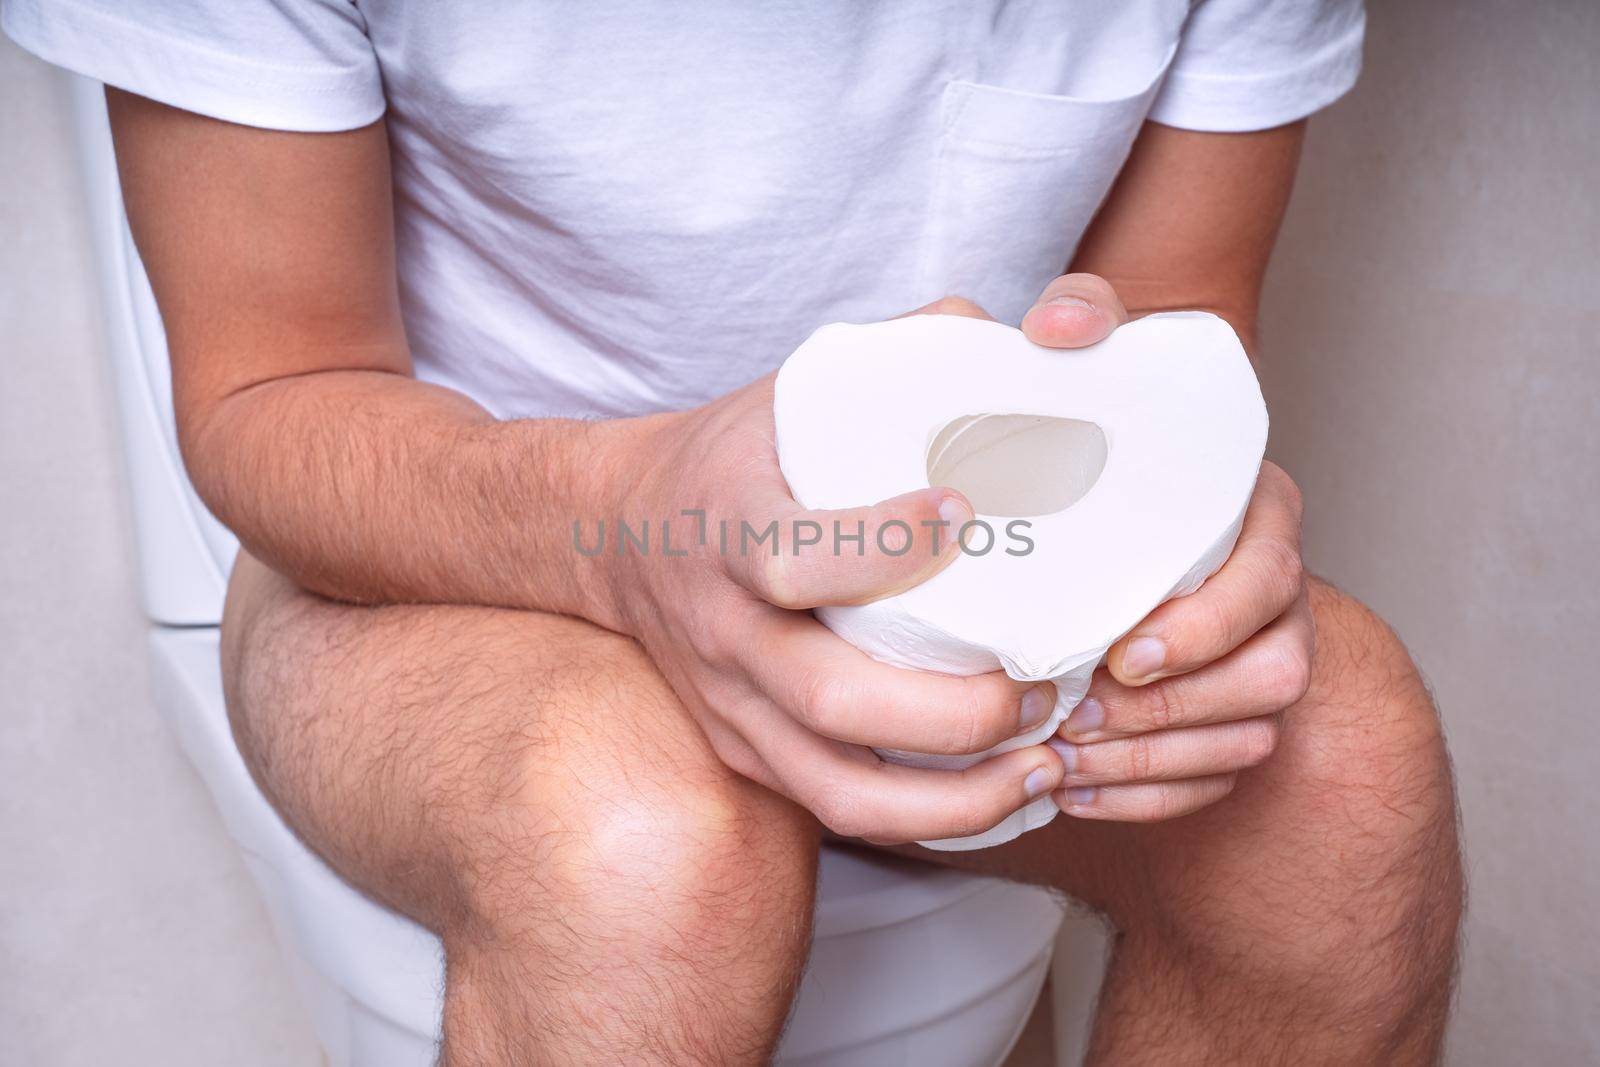 Man sitting on the toilet with toilet paper and suffering from constipation, diarrhea, stomach ache or cramps by DariaKulkova